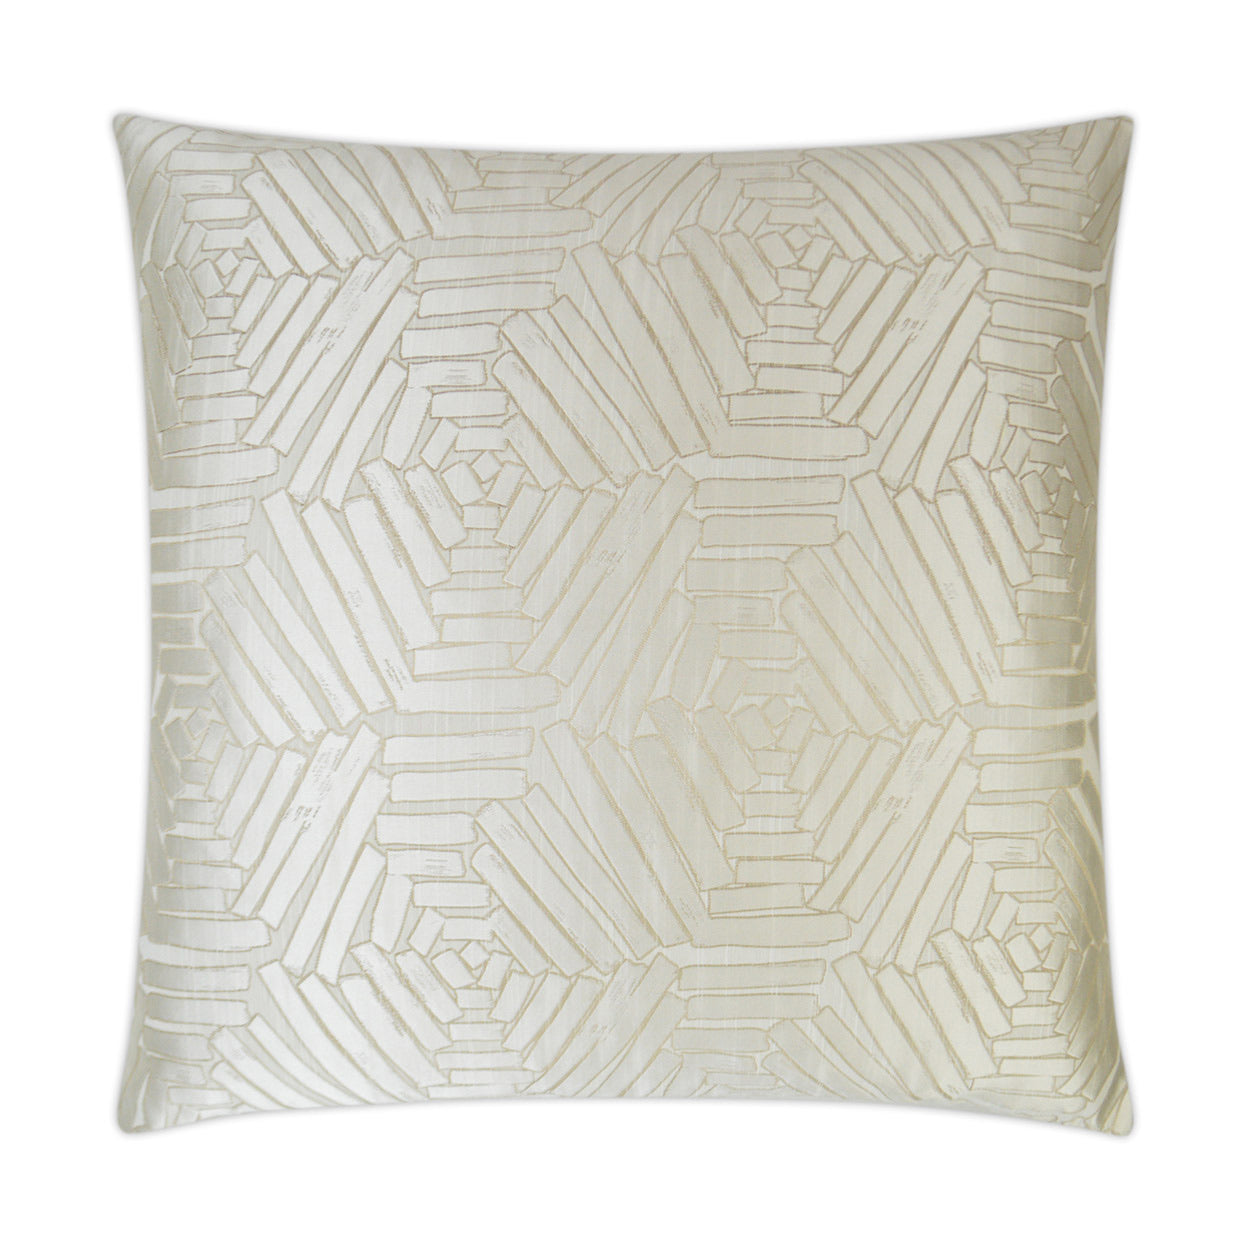 Percy-Pearl 20x20 Pillow